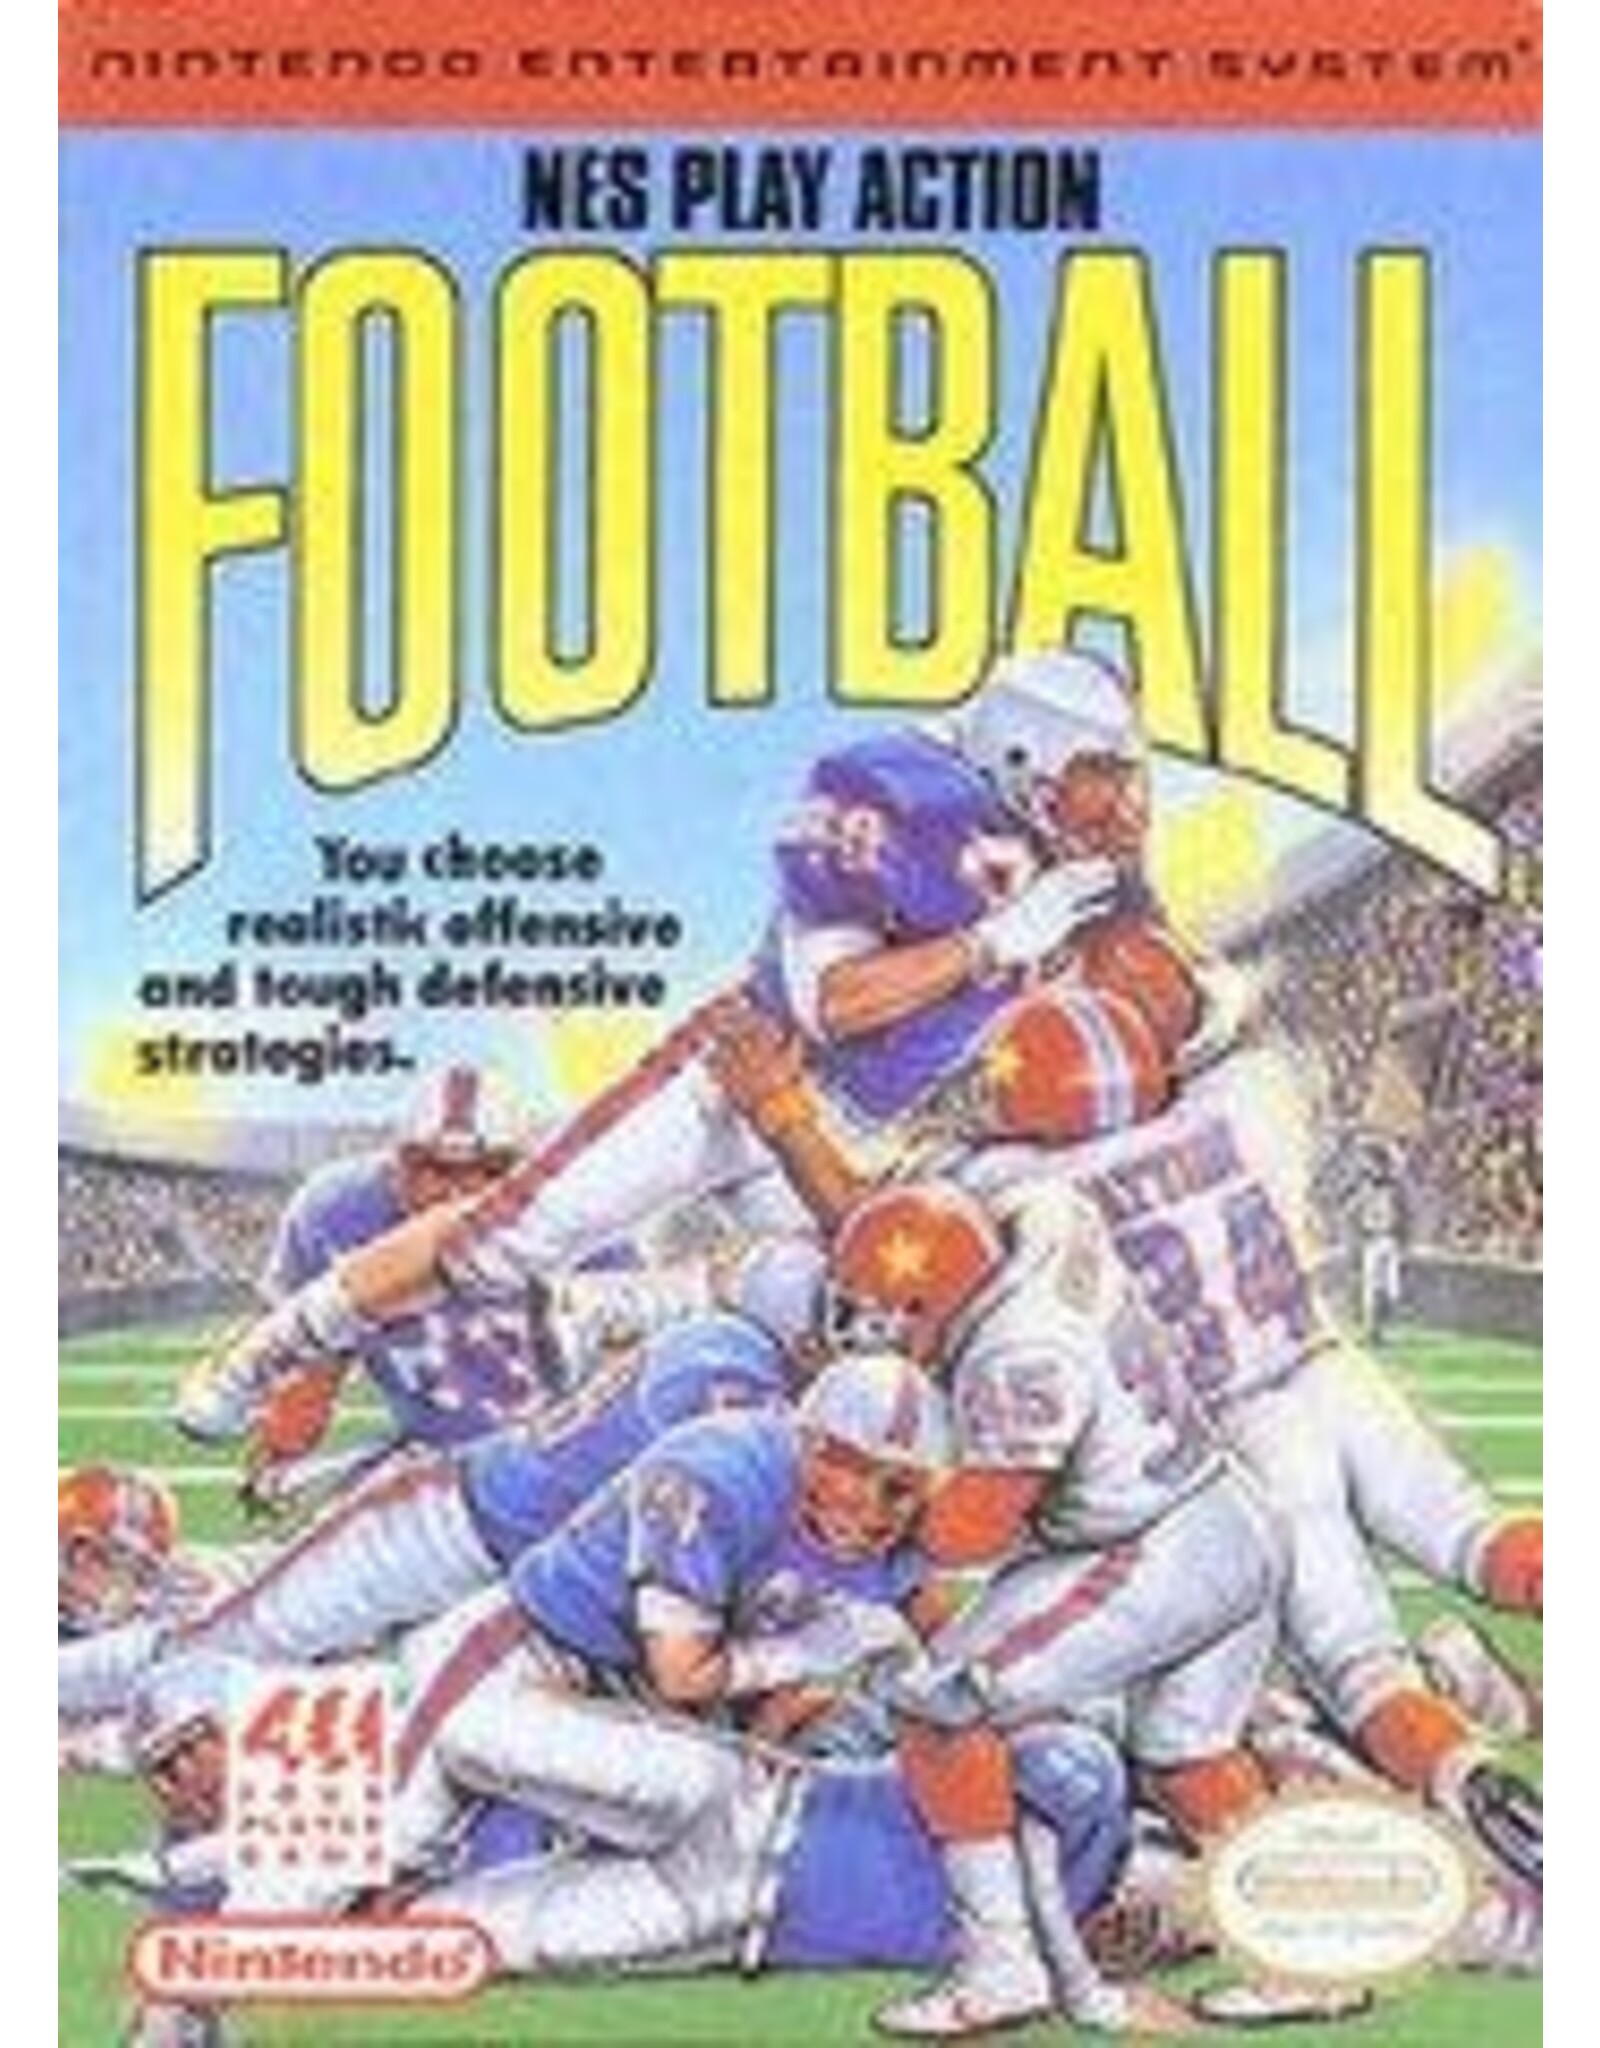 NES Play Action Football (Used, No Manual, Cosmetic Damage)